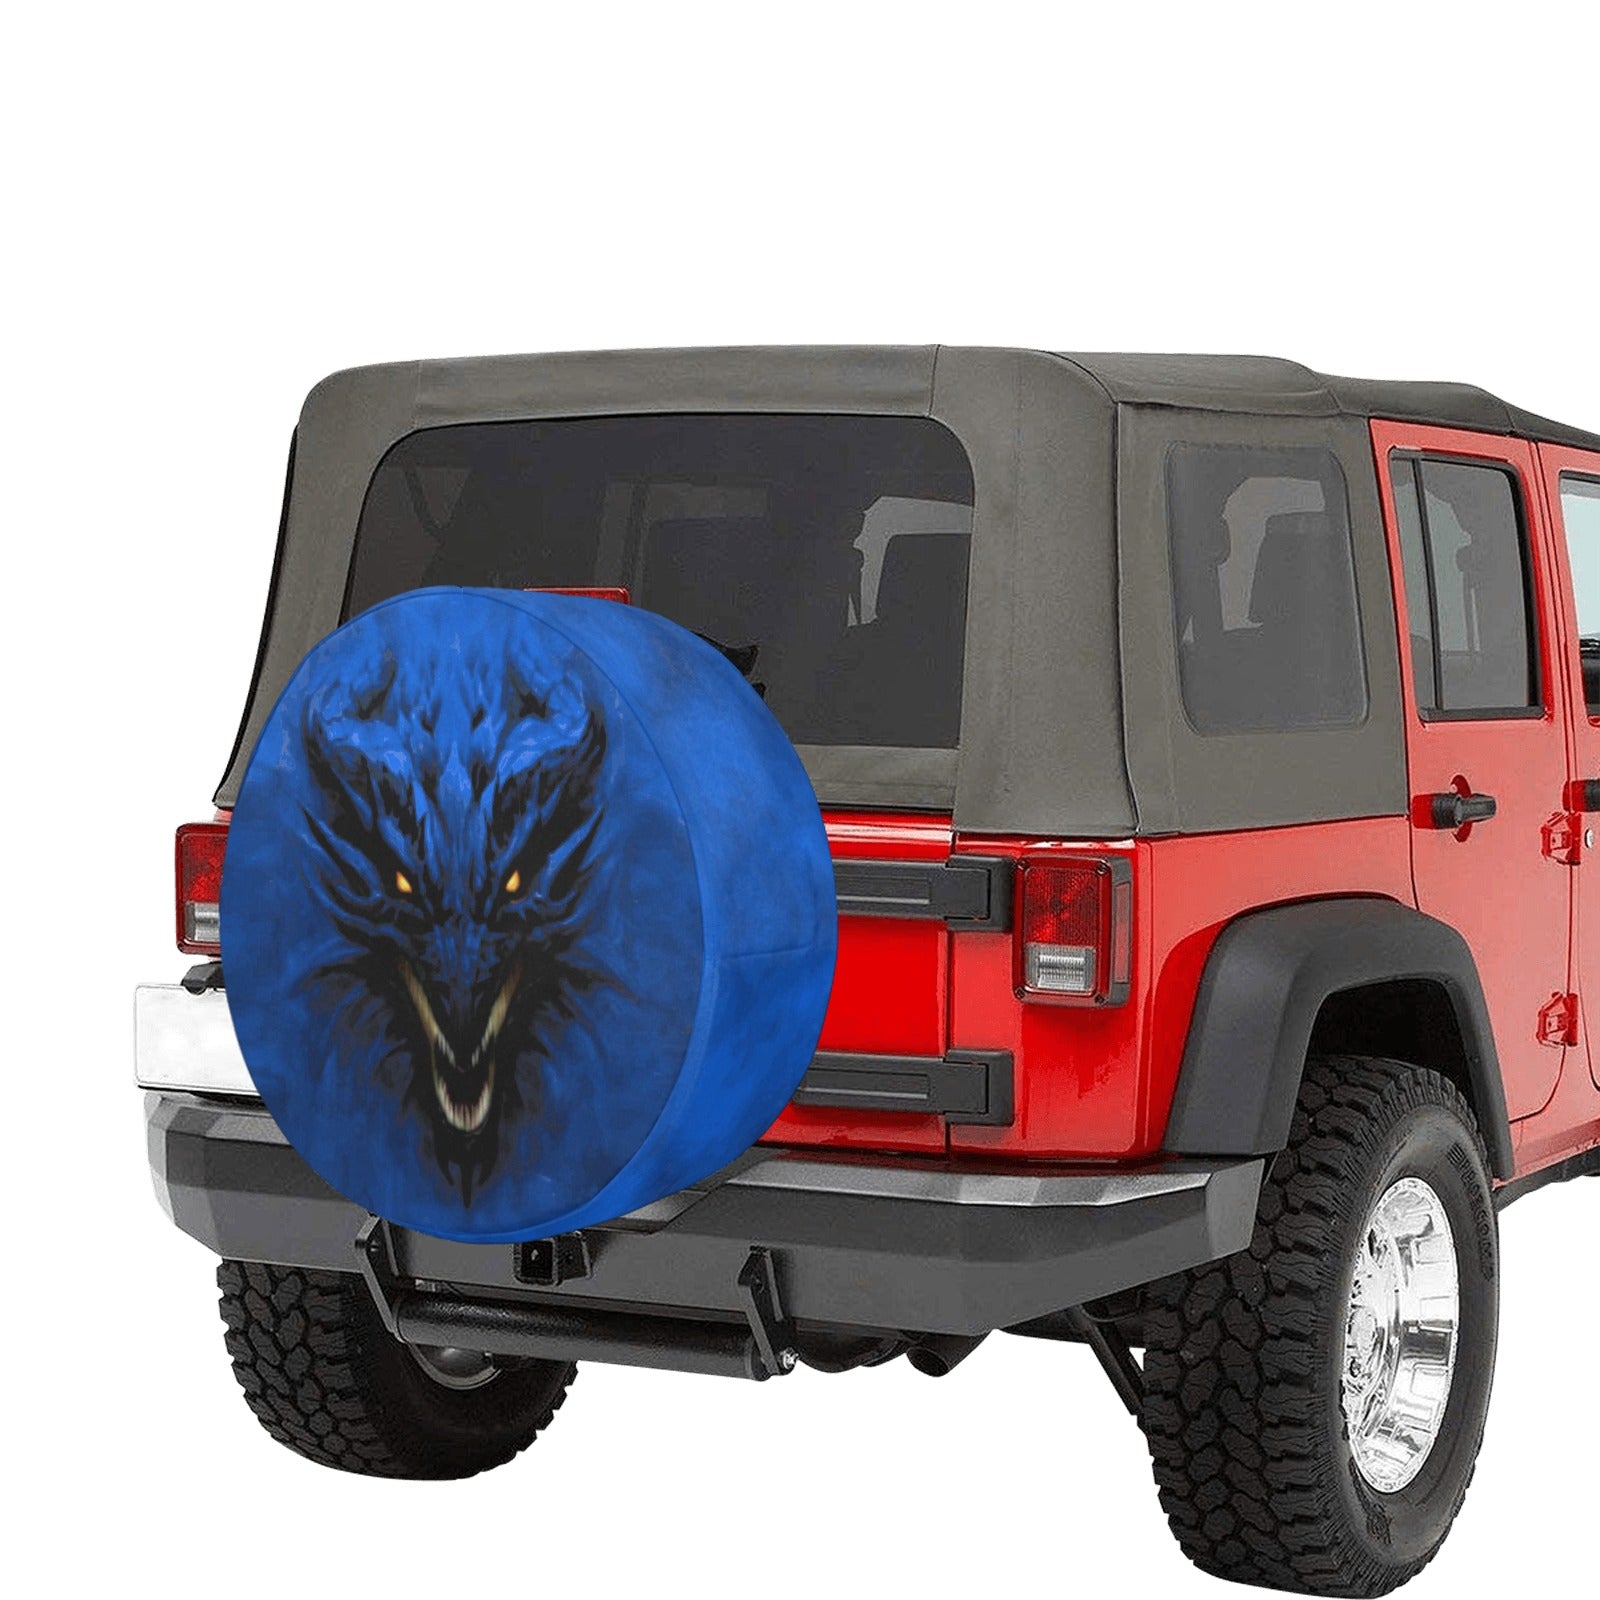 Rich Blue Shadow Dragon Spare Tire Cover (Large) (17")